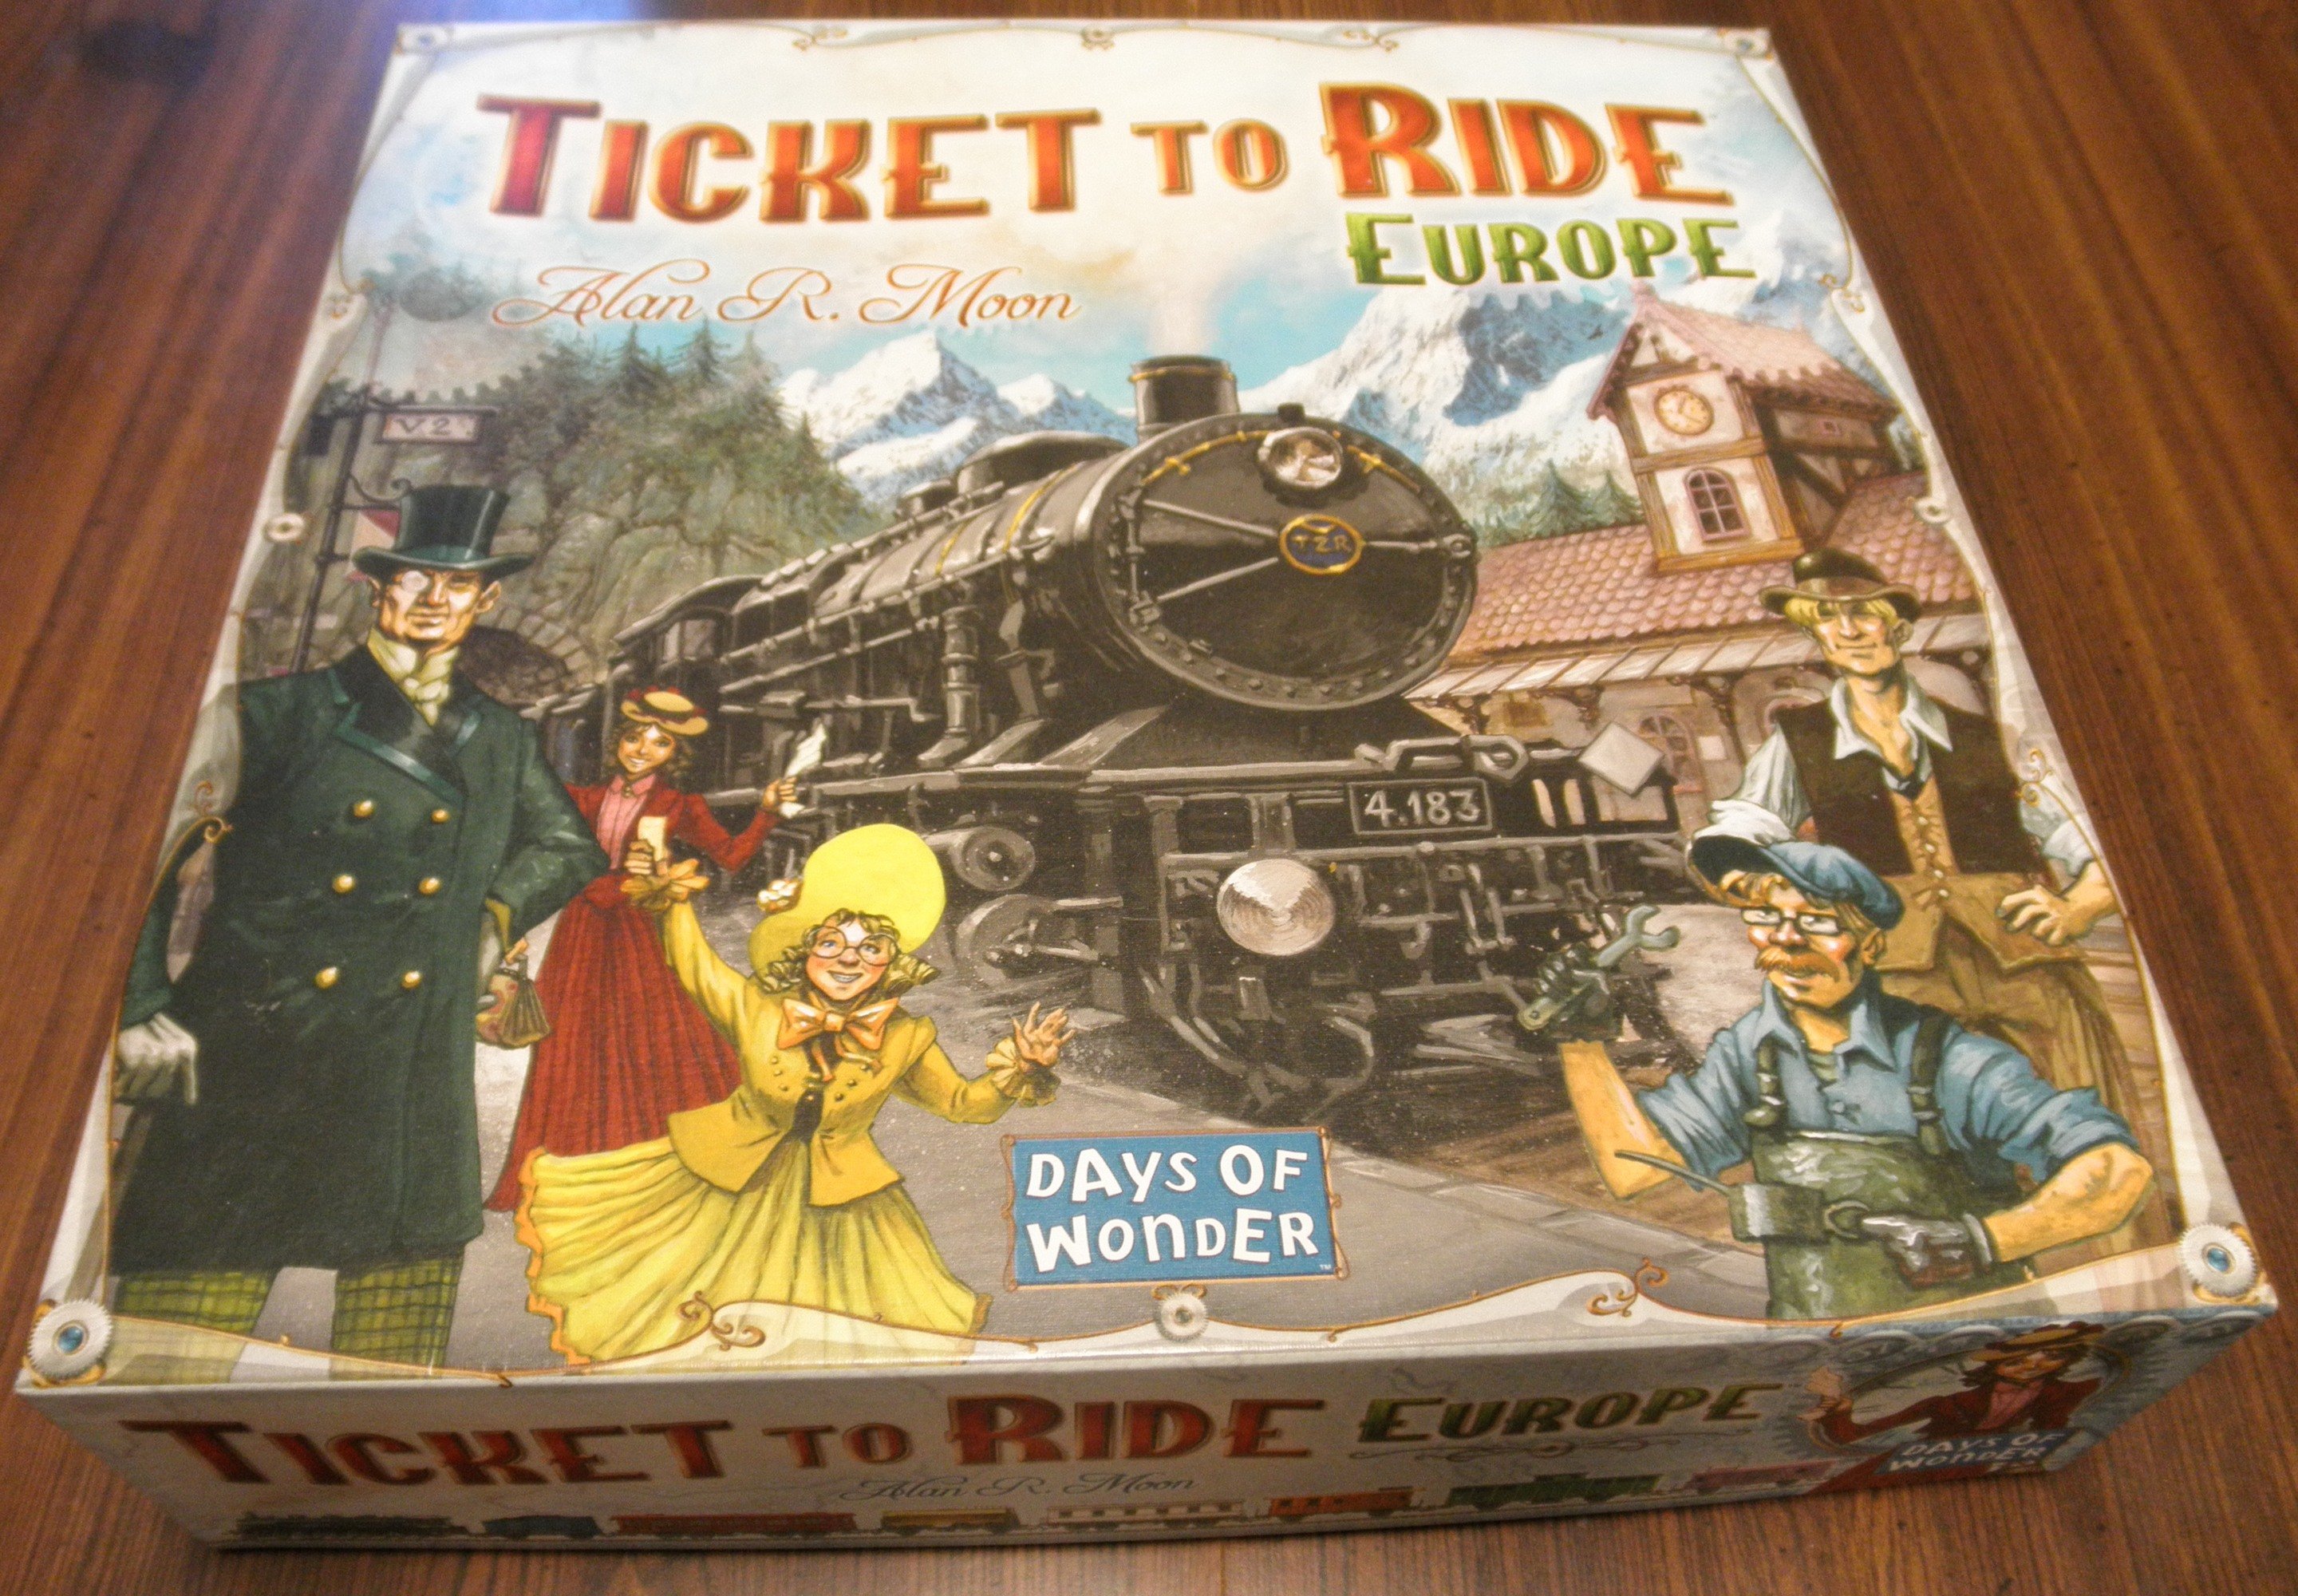 Peregrination Wennen aan luchthaven Ticket to Ride Europe Board Game Review - Geeky Hobbies